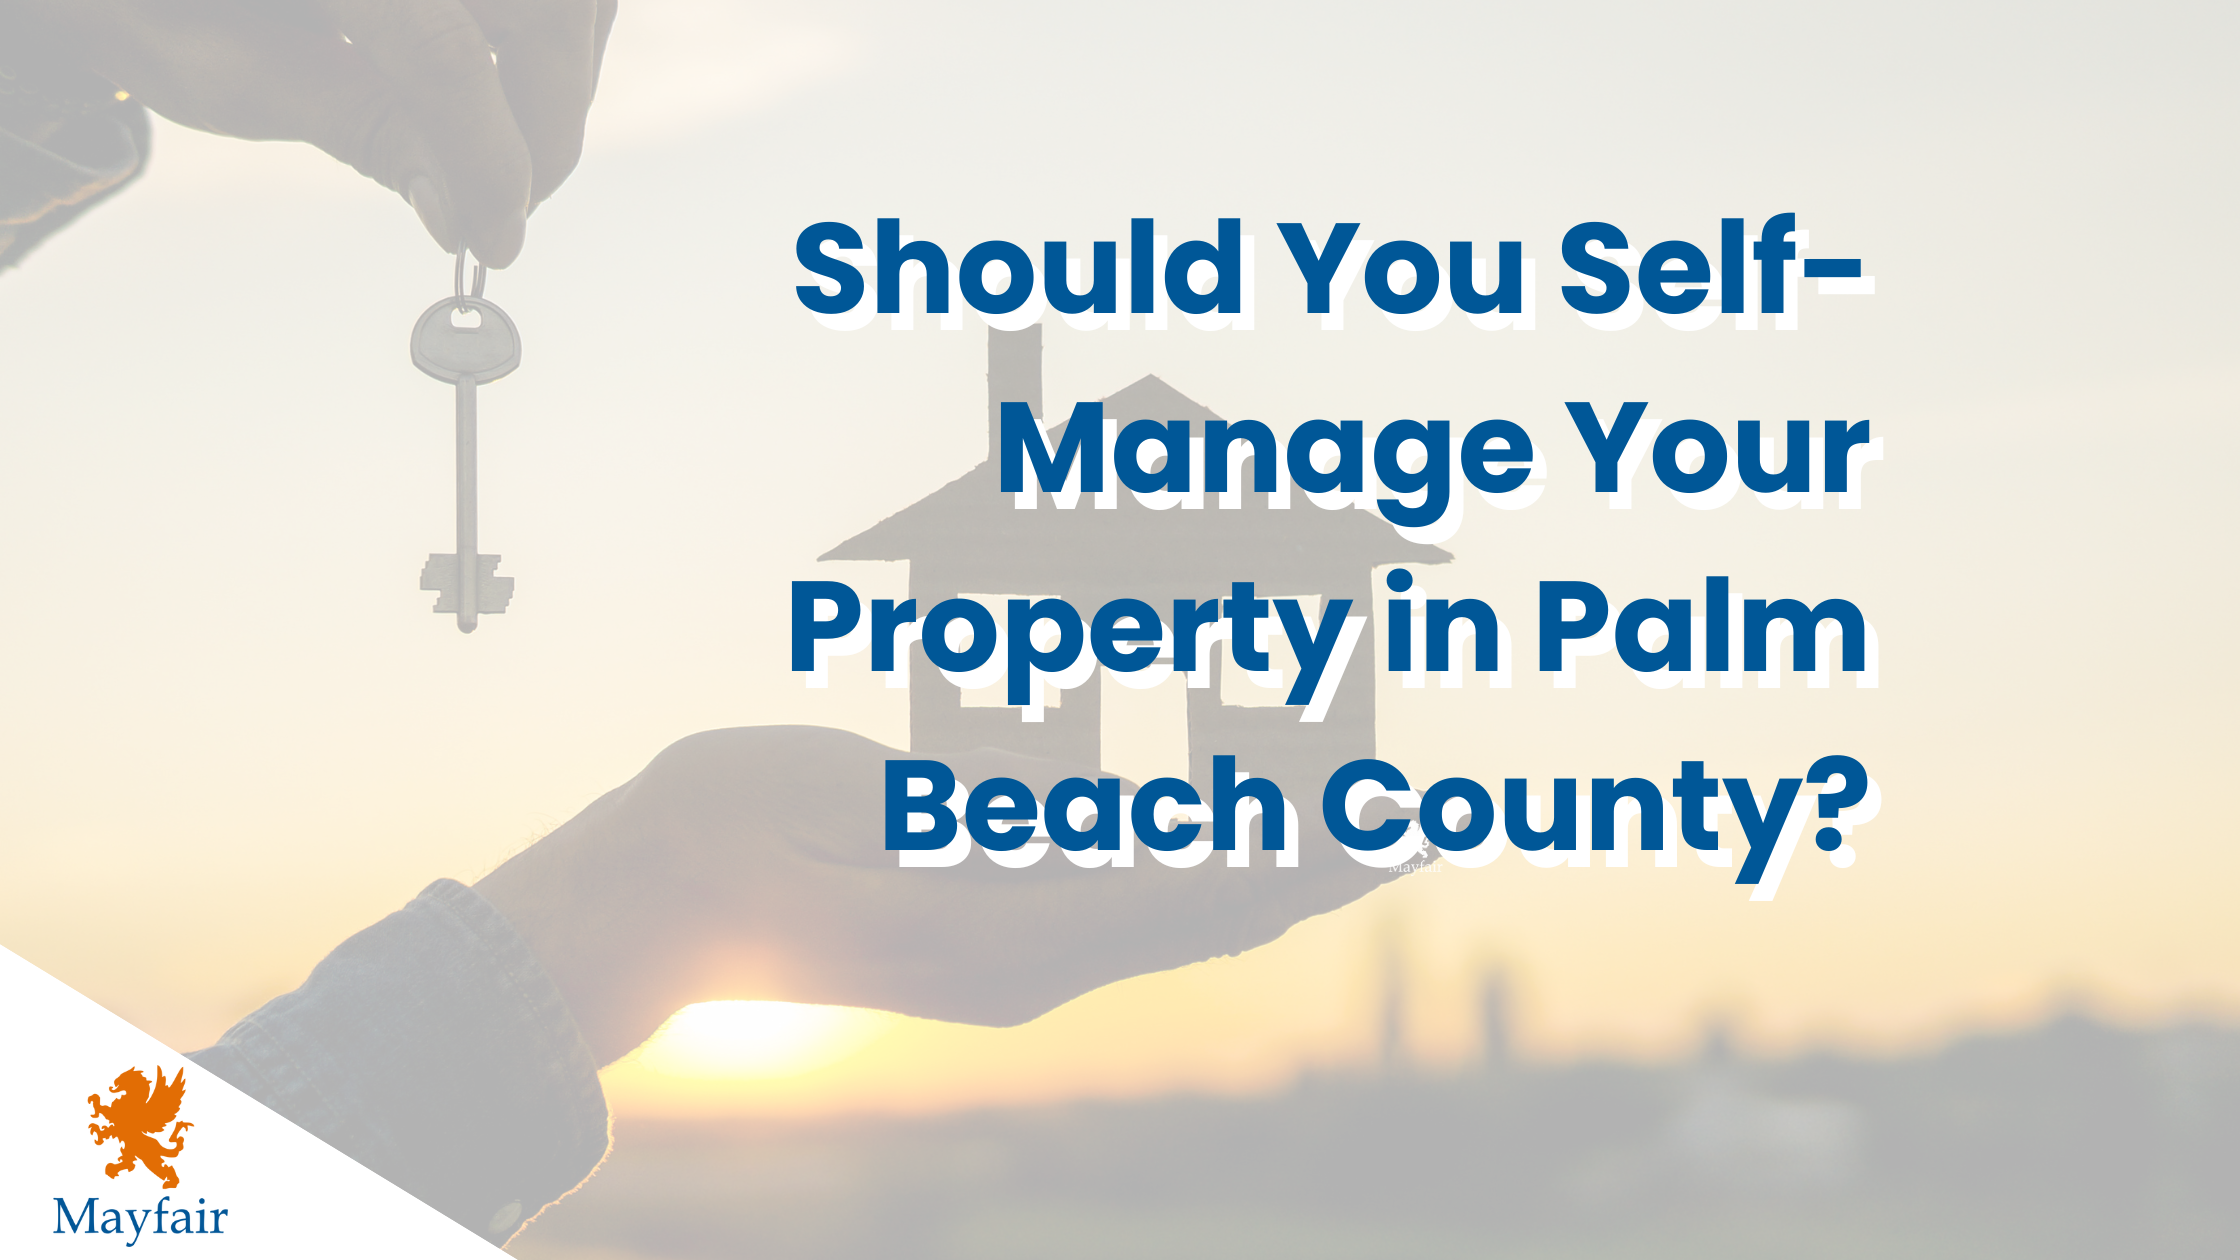 Should You Self-Manage Your Property in Palm Beach County?